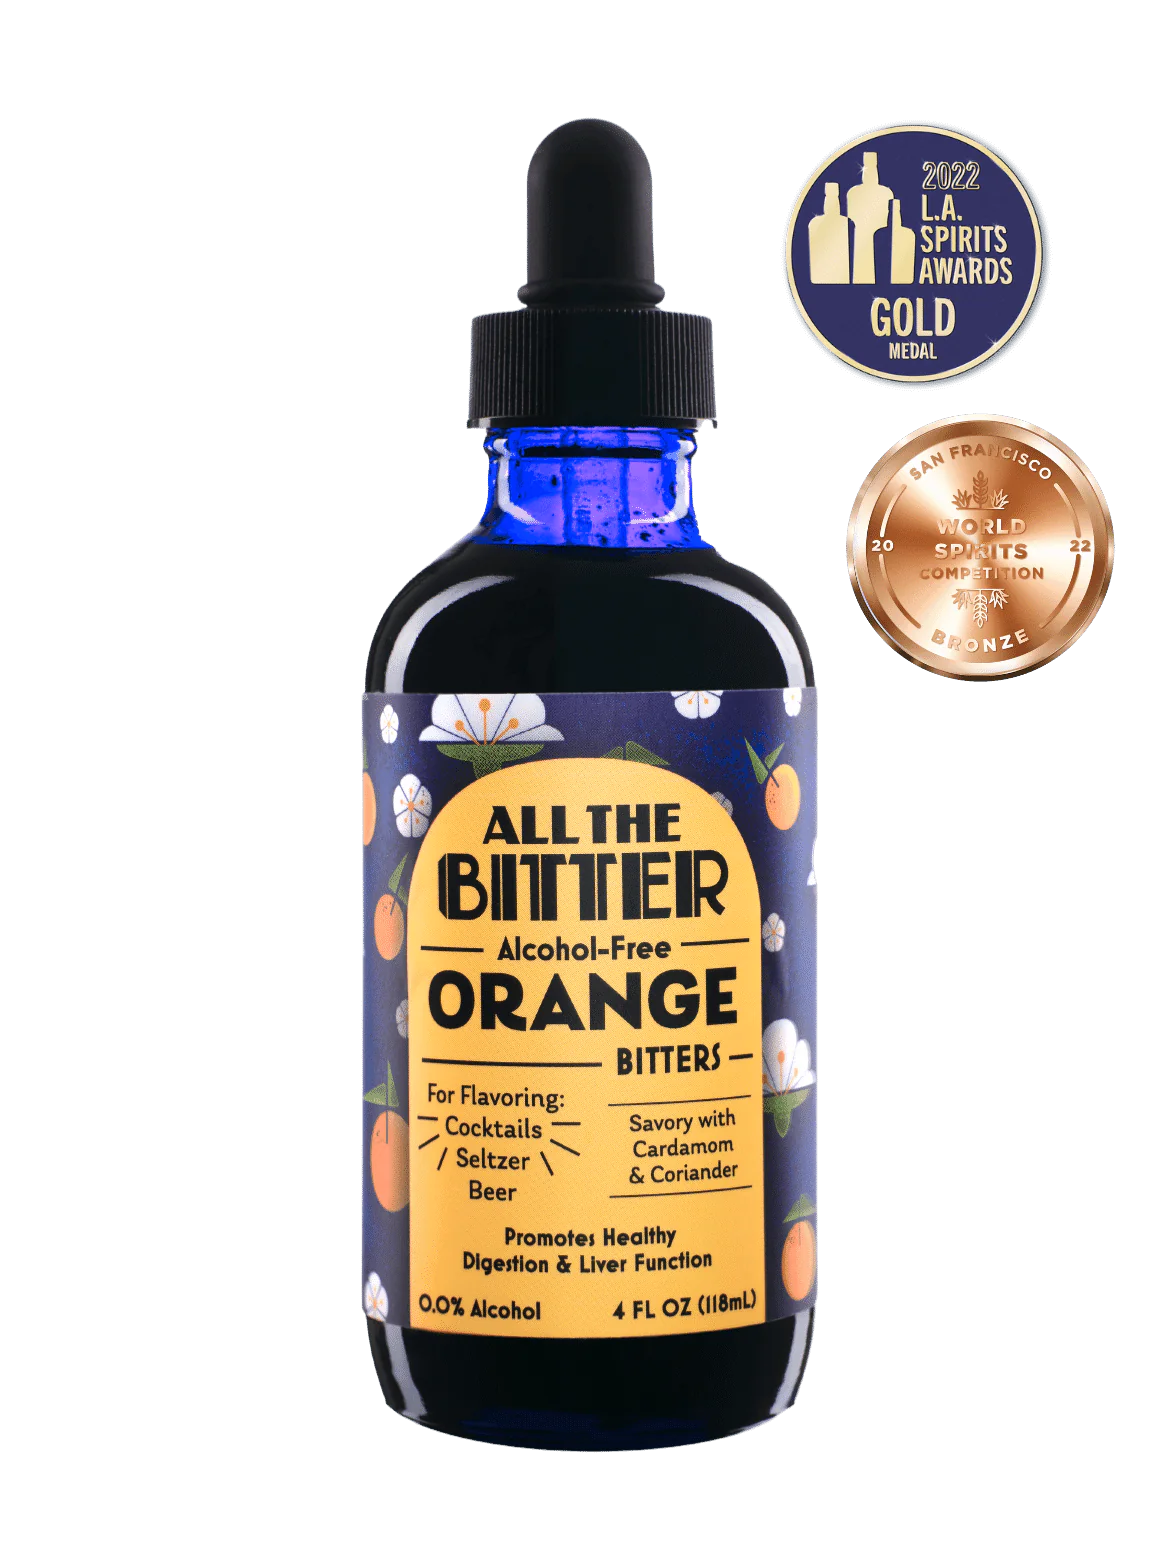 All The Bitter - Orange Bitters (Non-Alcoholic)